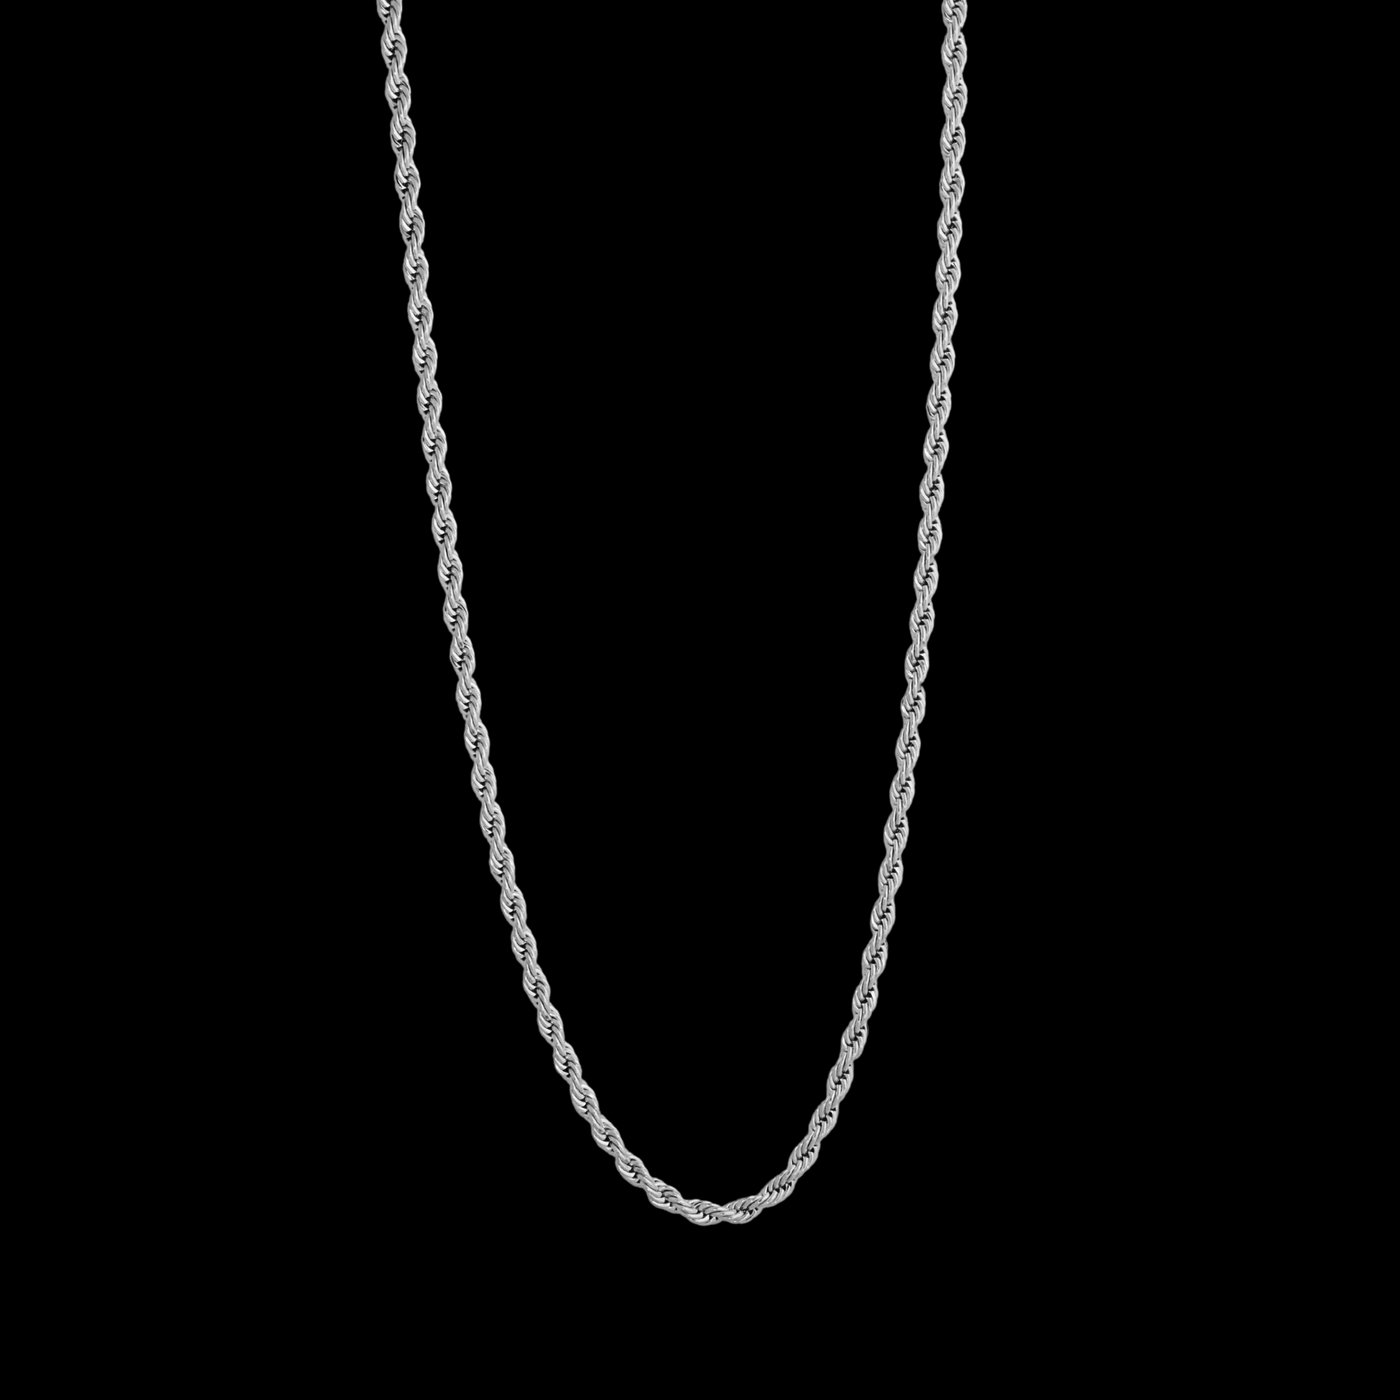 Rope necklace 3 mm